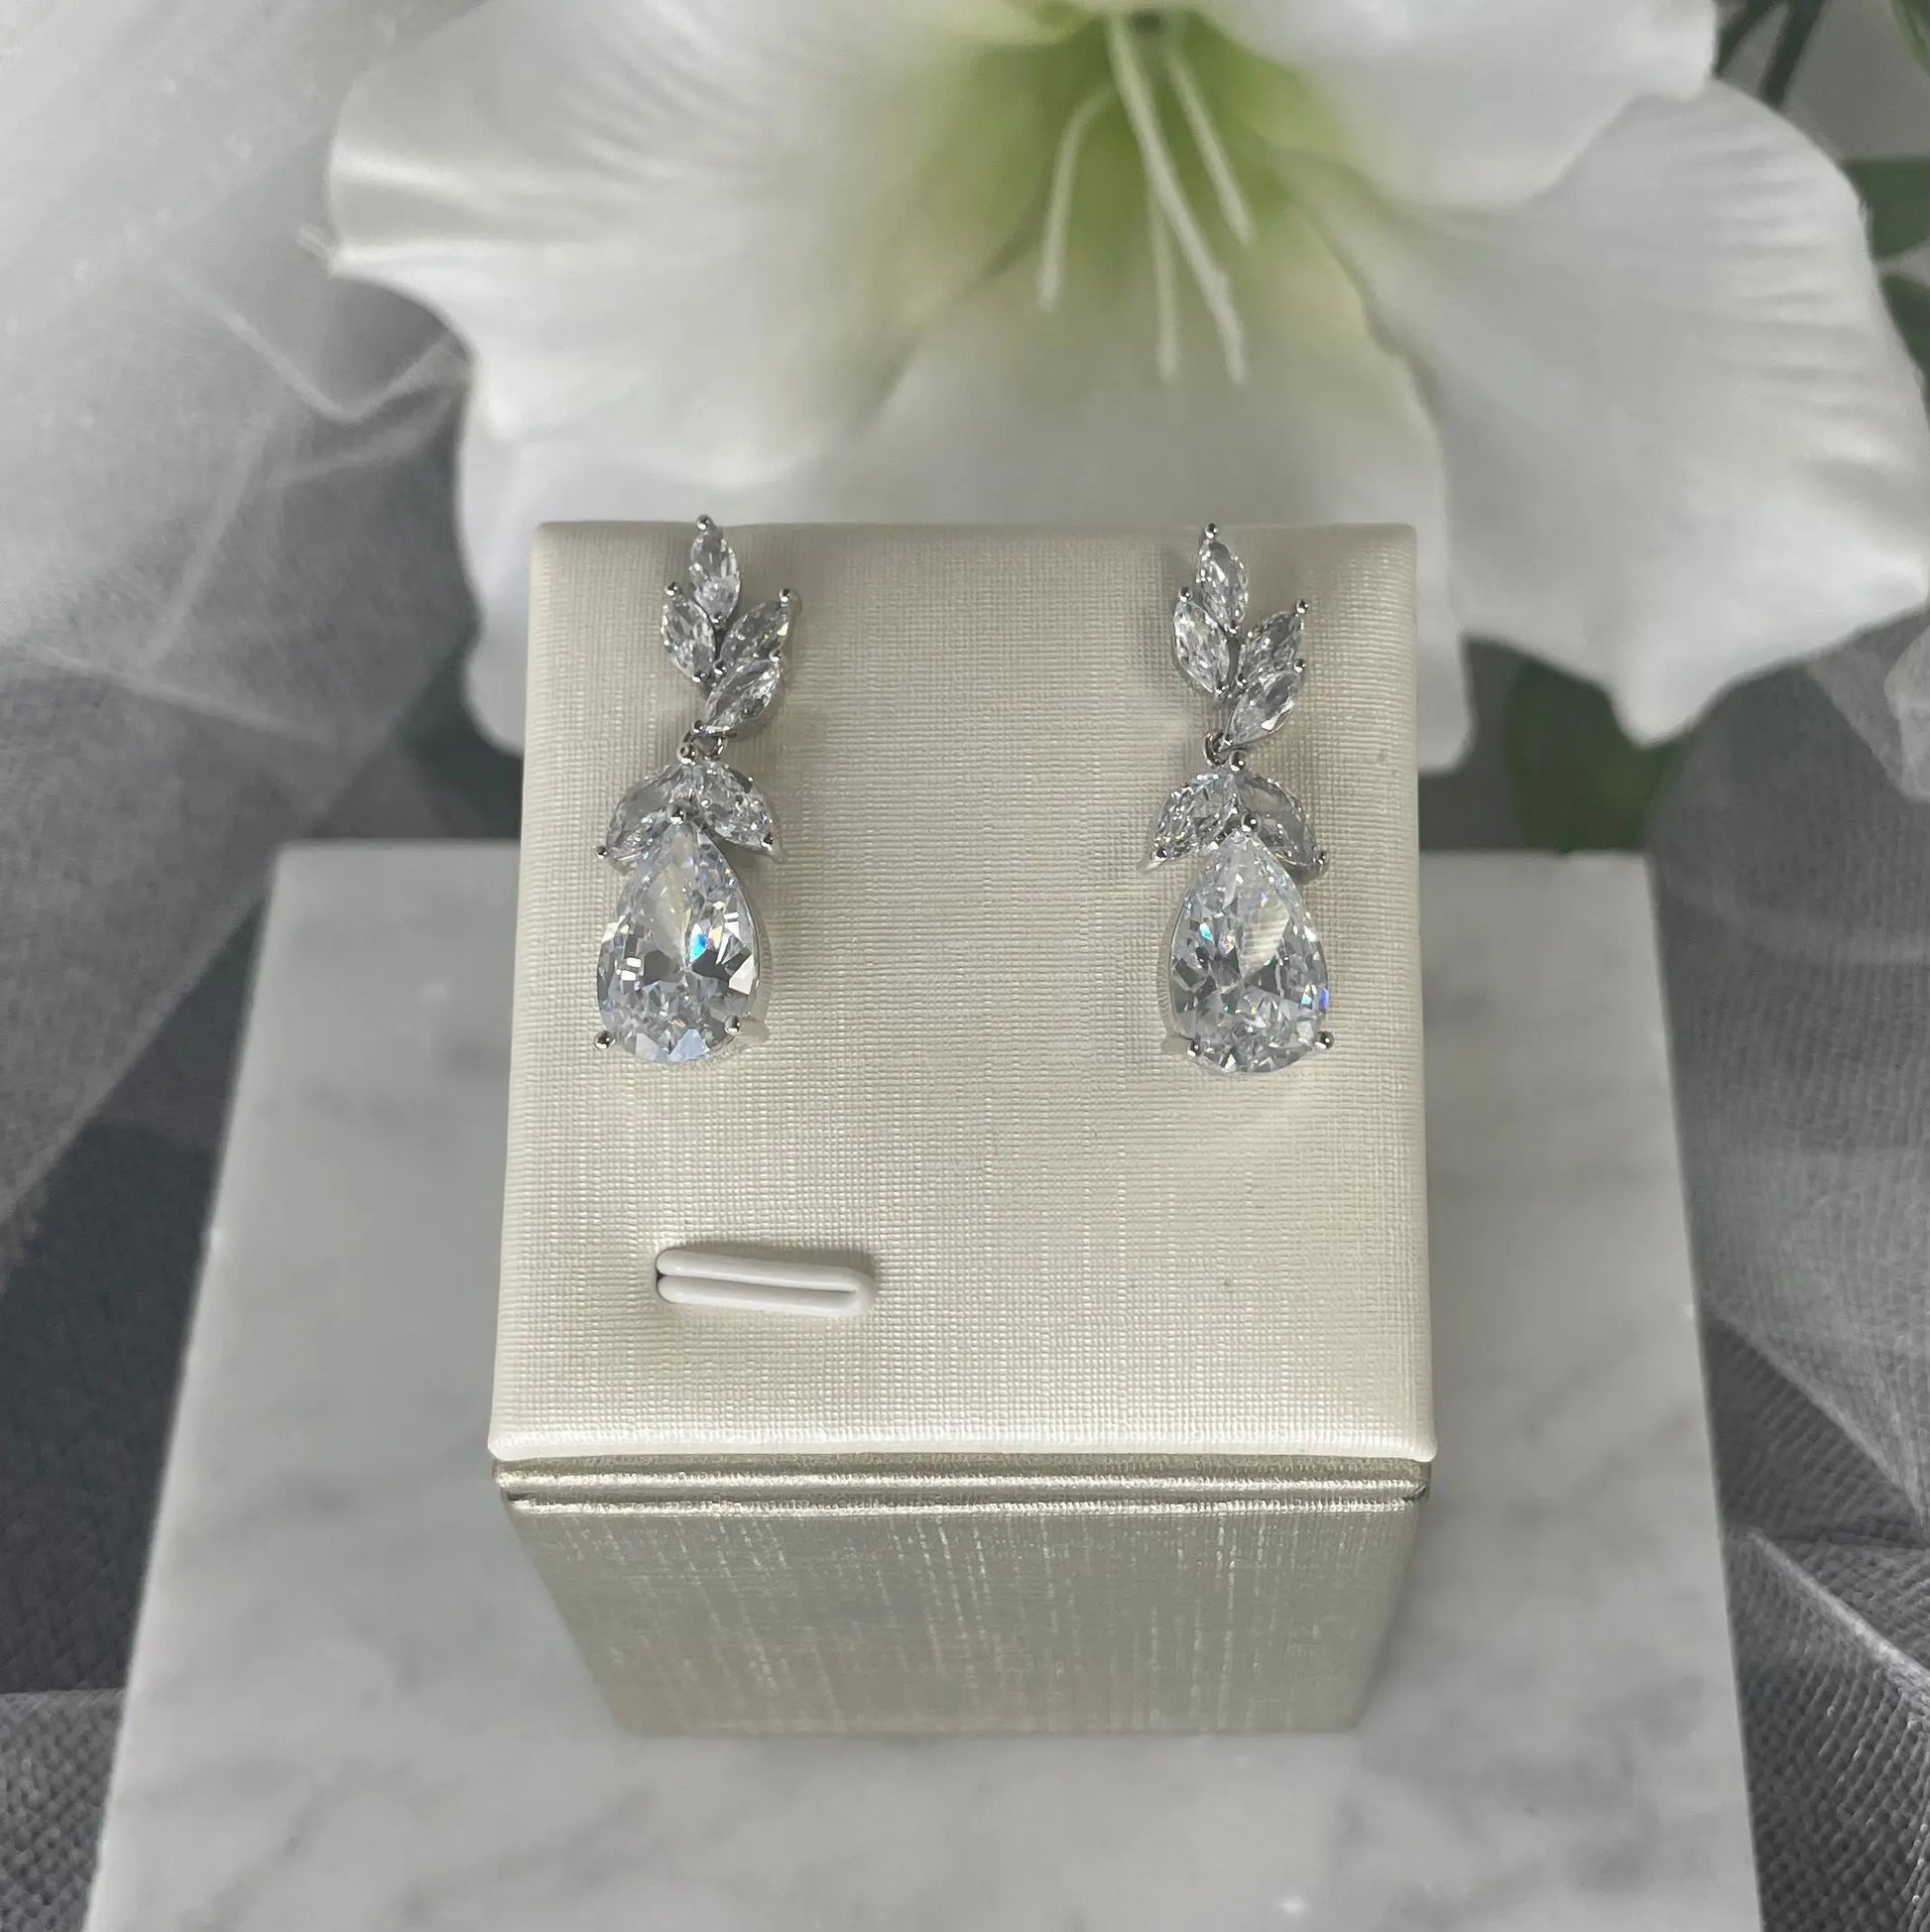 Maisie CZ Drop Bridal Wedding Earrings: Elegant bridal earrings featuring AAA zircon stones and a water drop crystal, perfect for weddings and special occasions.